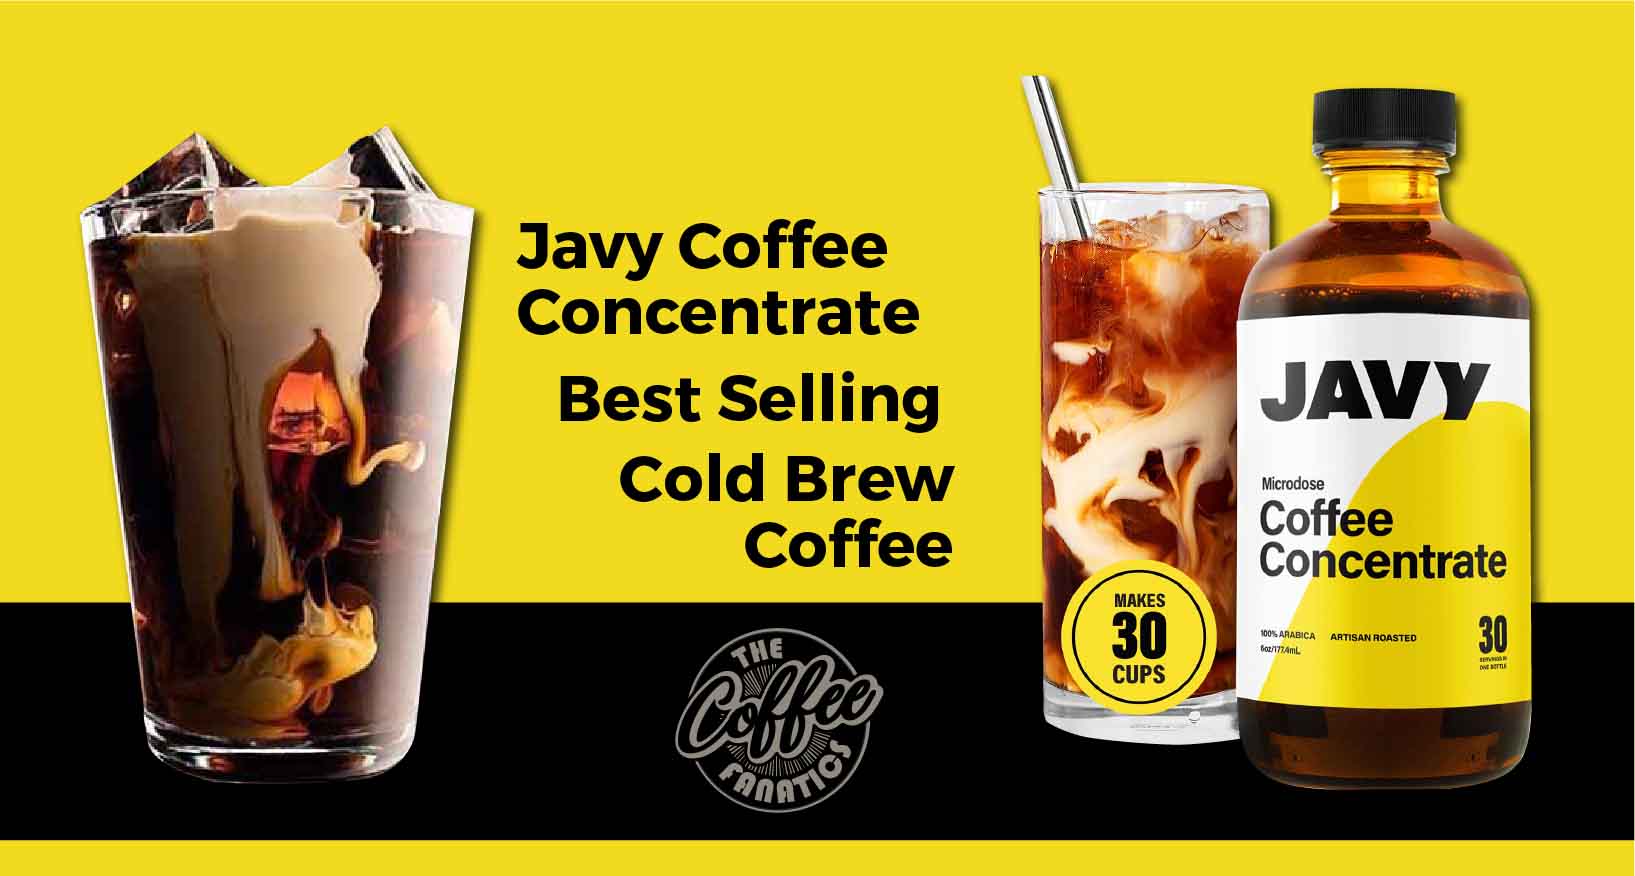 Javy Coffee Concentrate | Best Selling Concentrated Cold Brew Coffee